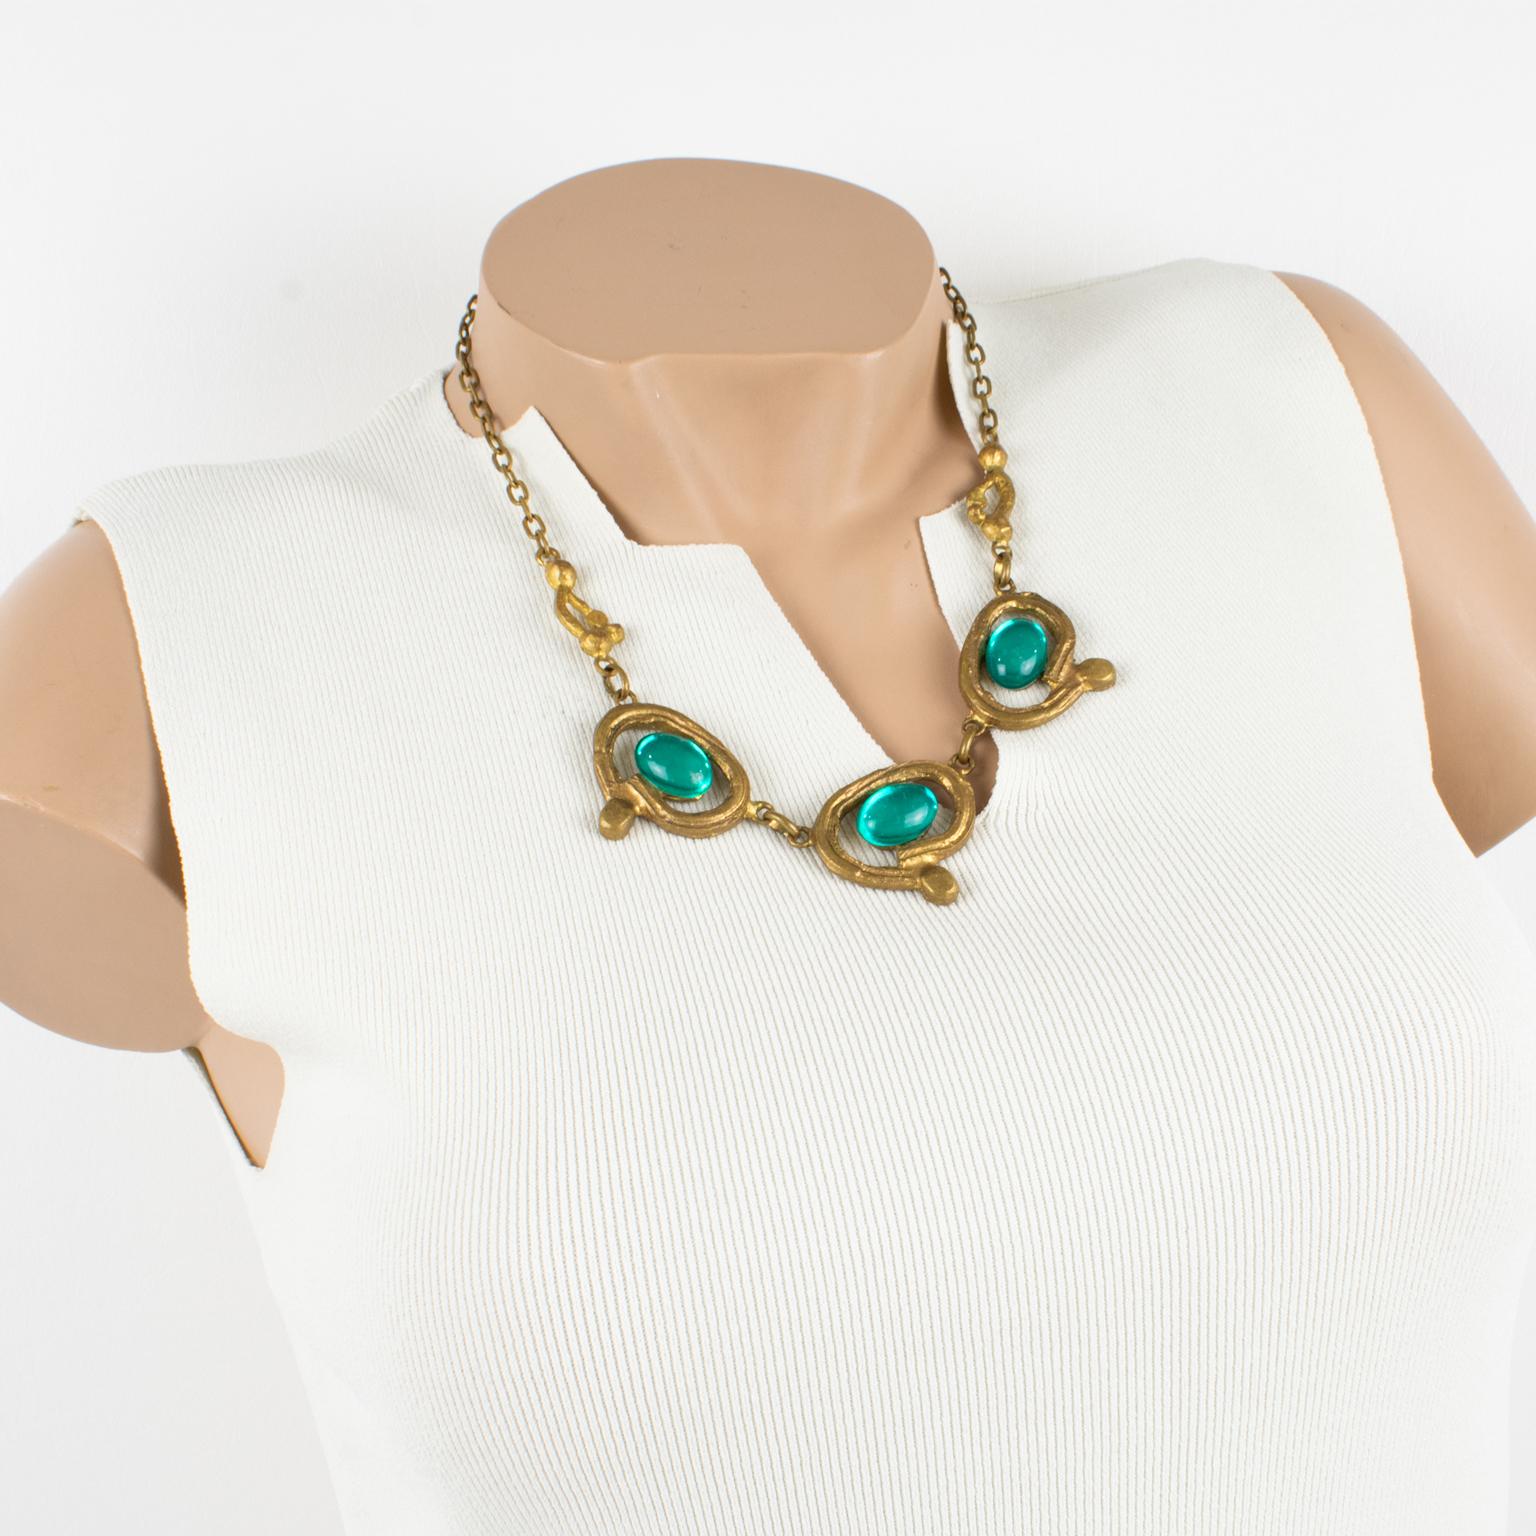 Lovely Henry Perichon (aka Henry), Medieval revival bronze metal choker necklace. Three gilded bronze elements in an antique Middle-Age design influence ornate with turquoise blue poured glass cabochons. The gilded bronze chain with hook closing